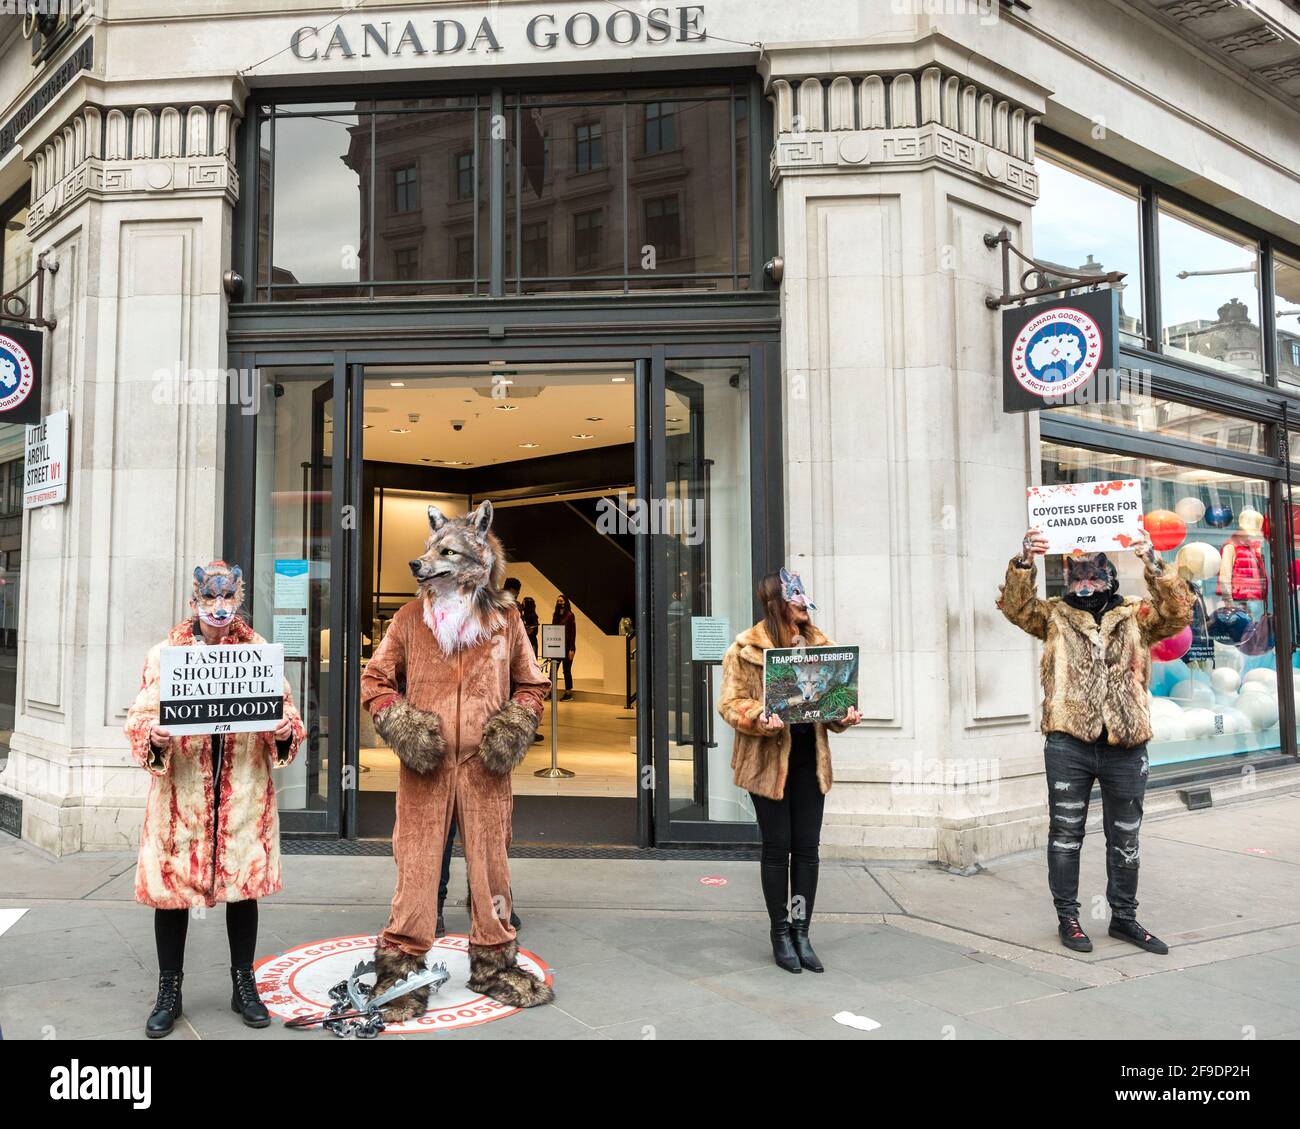 London, UK. 18th Apr, 2021. Activists seen holding placards expressing  their opinion during the demonstration.Animal cruelty activists Peta UK  (People for the Ethical Treatment of Animals) protest against the inhumane  treatment of